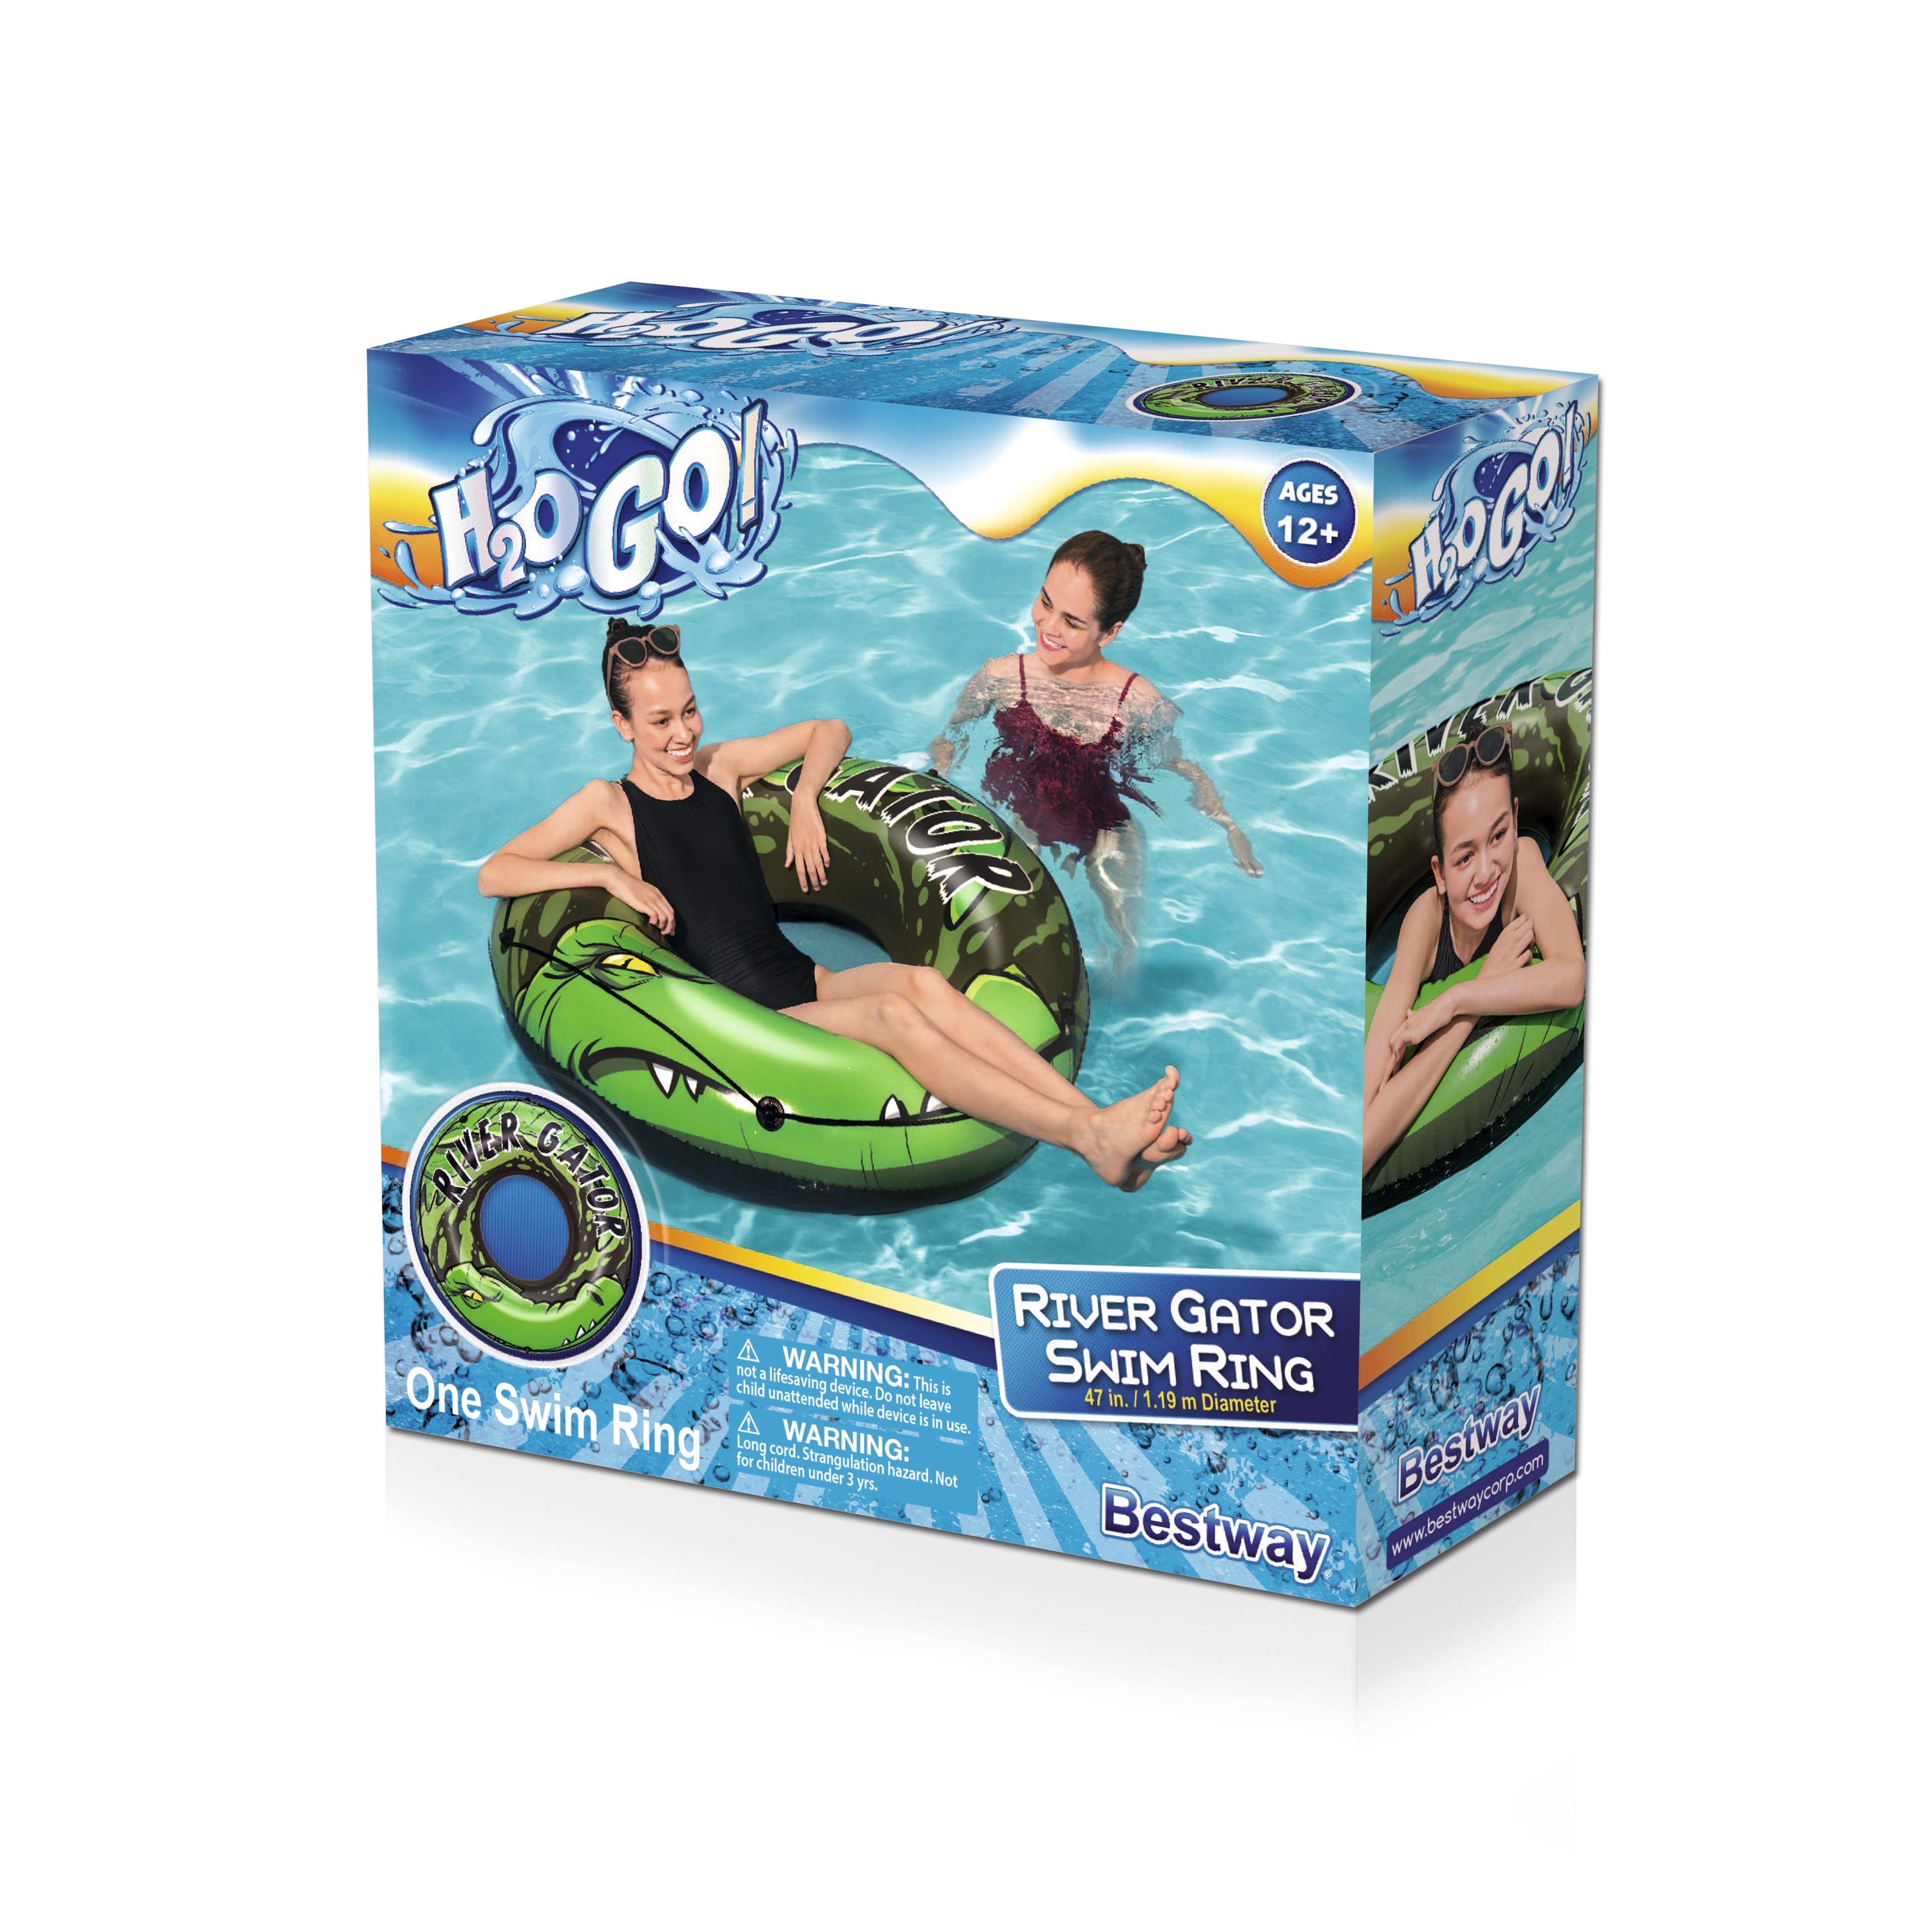 H2OGO! Green River Gator 47" Pool Ring Float with Grab Rope, Adult Unisex - image 4 of 9